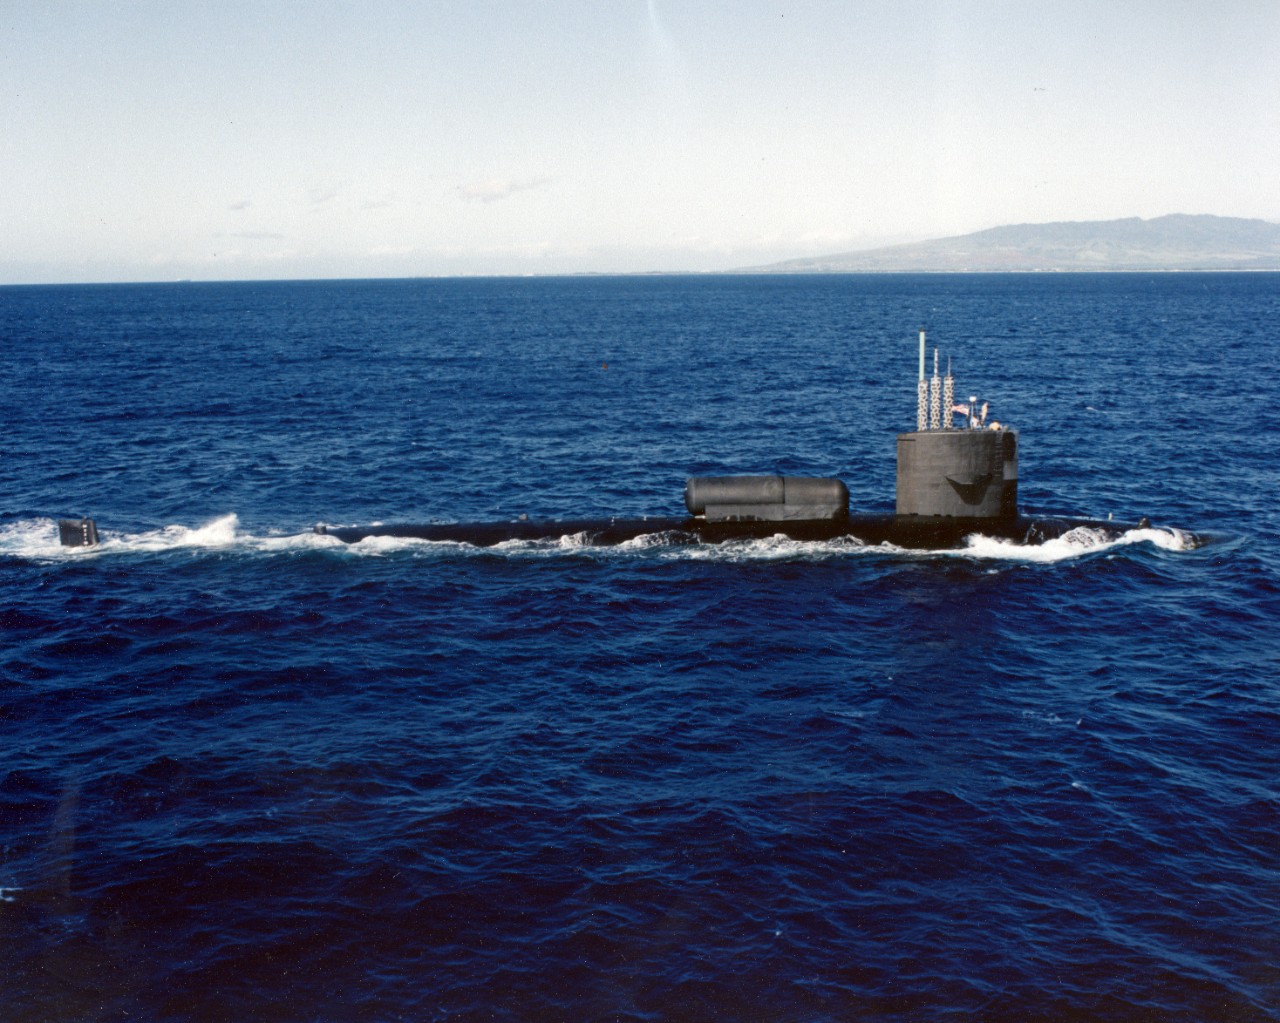 Starboard broadside view of nuclear powered attack submarine USS William H. Bates (SSN-680) underway on the surface